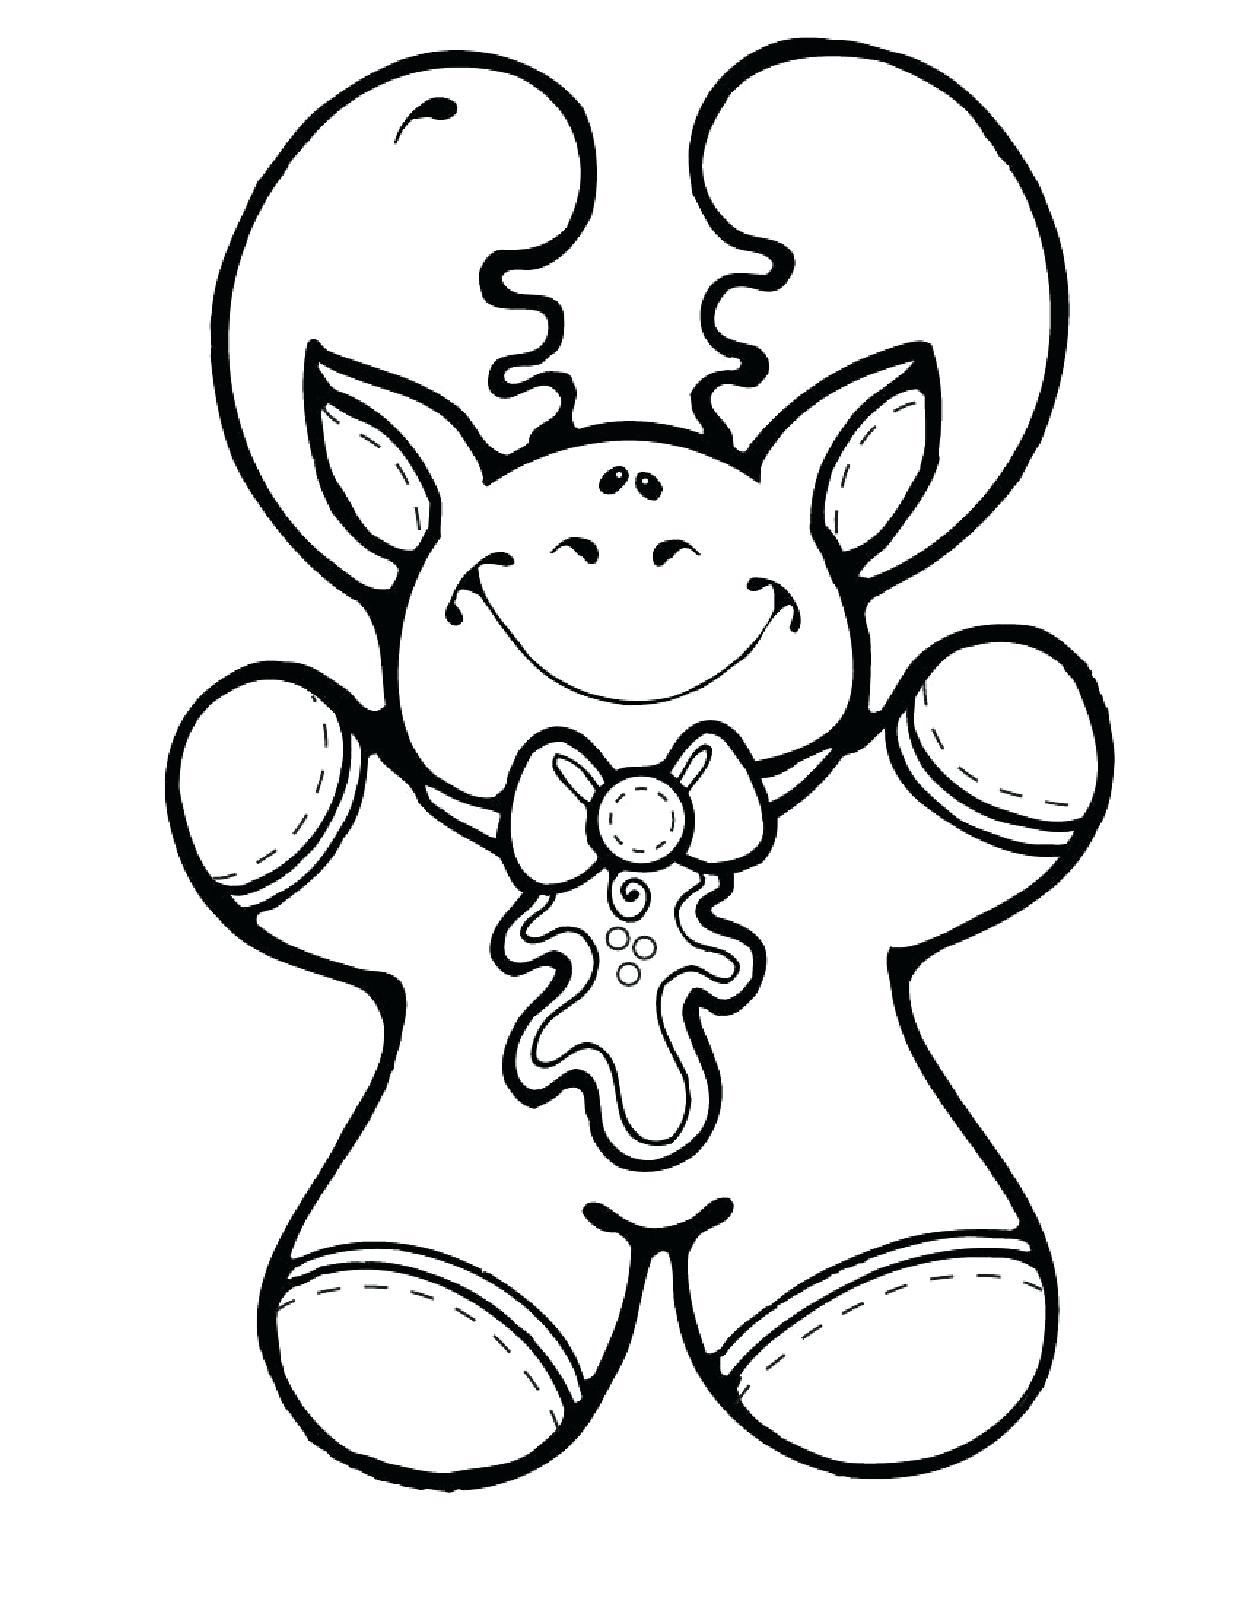 Rudolph Coloring Pages | Free download on ClipArtMag